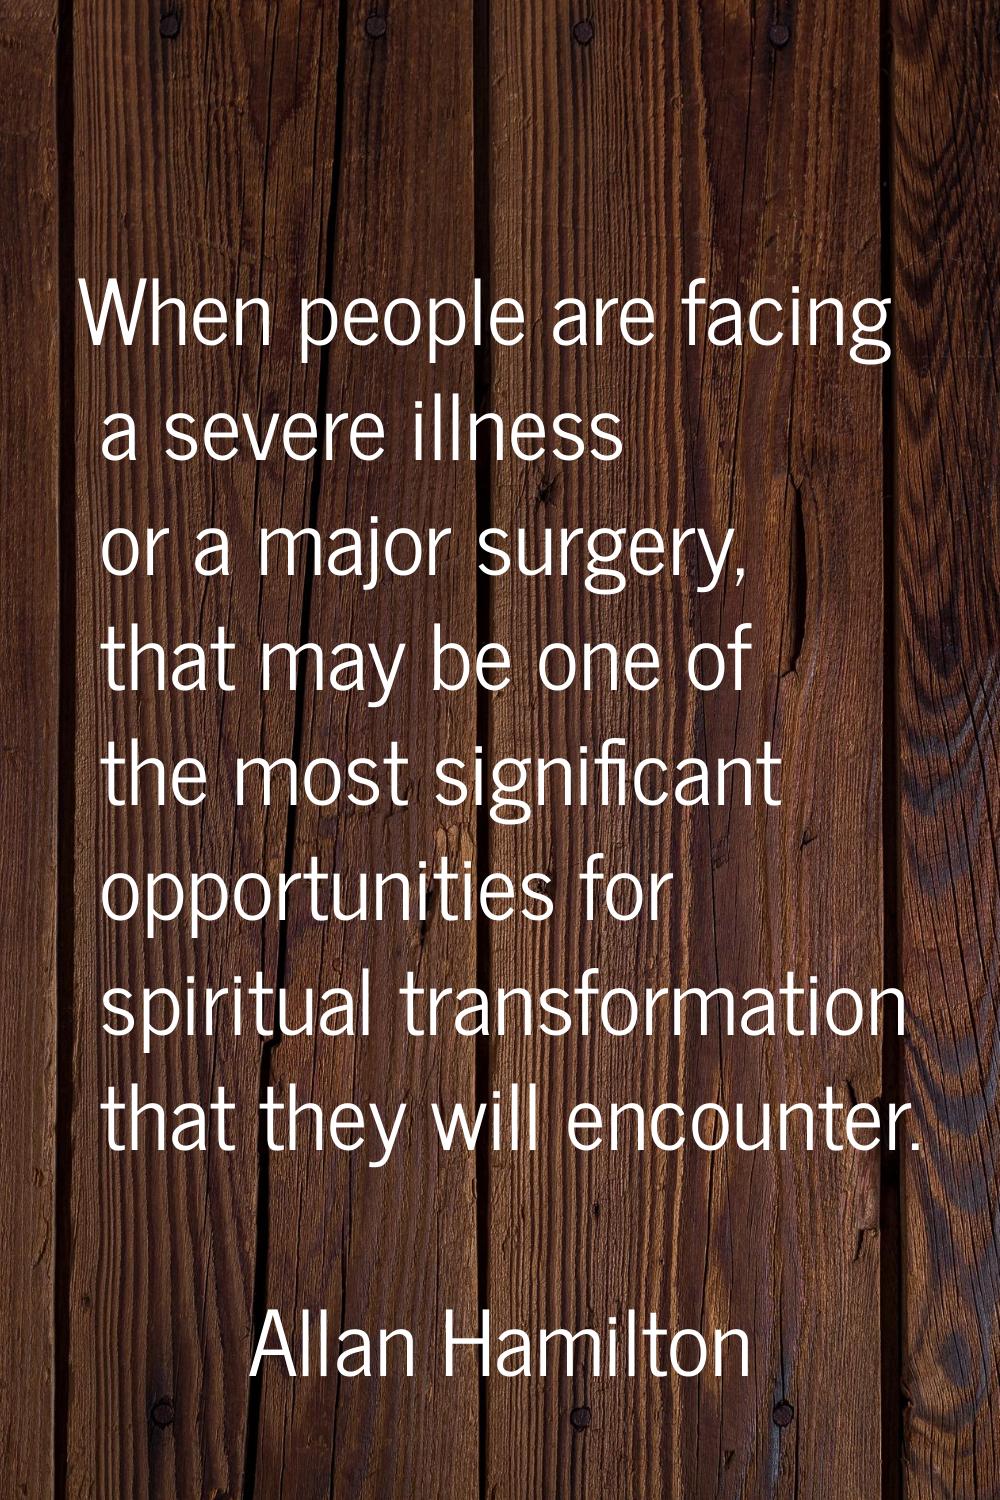 When people are facing a severe illness or a major surgery, that may be one of the most significant